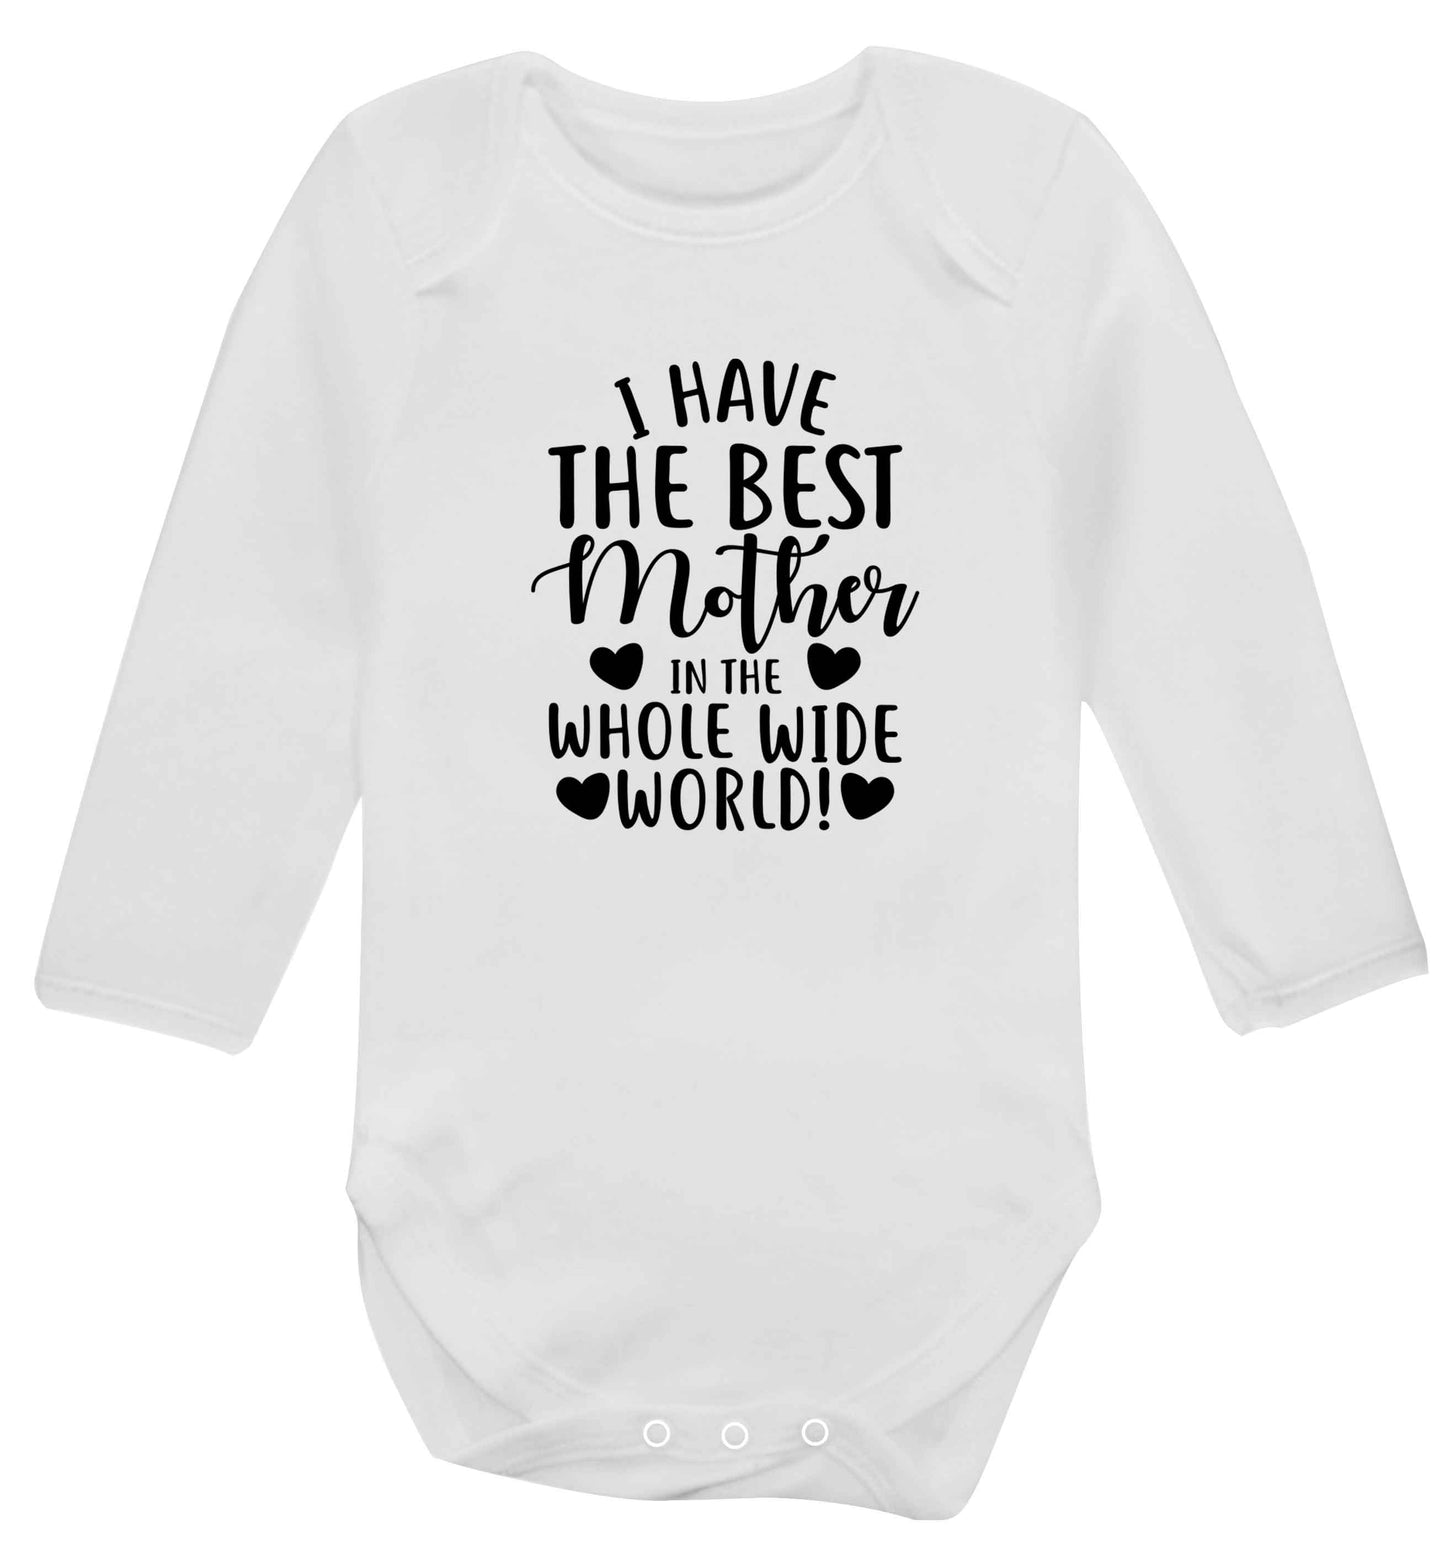 I have the best mother in the whole wide world baby vest long sleeved white 6-12 months